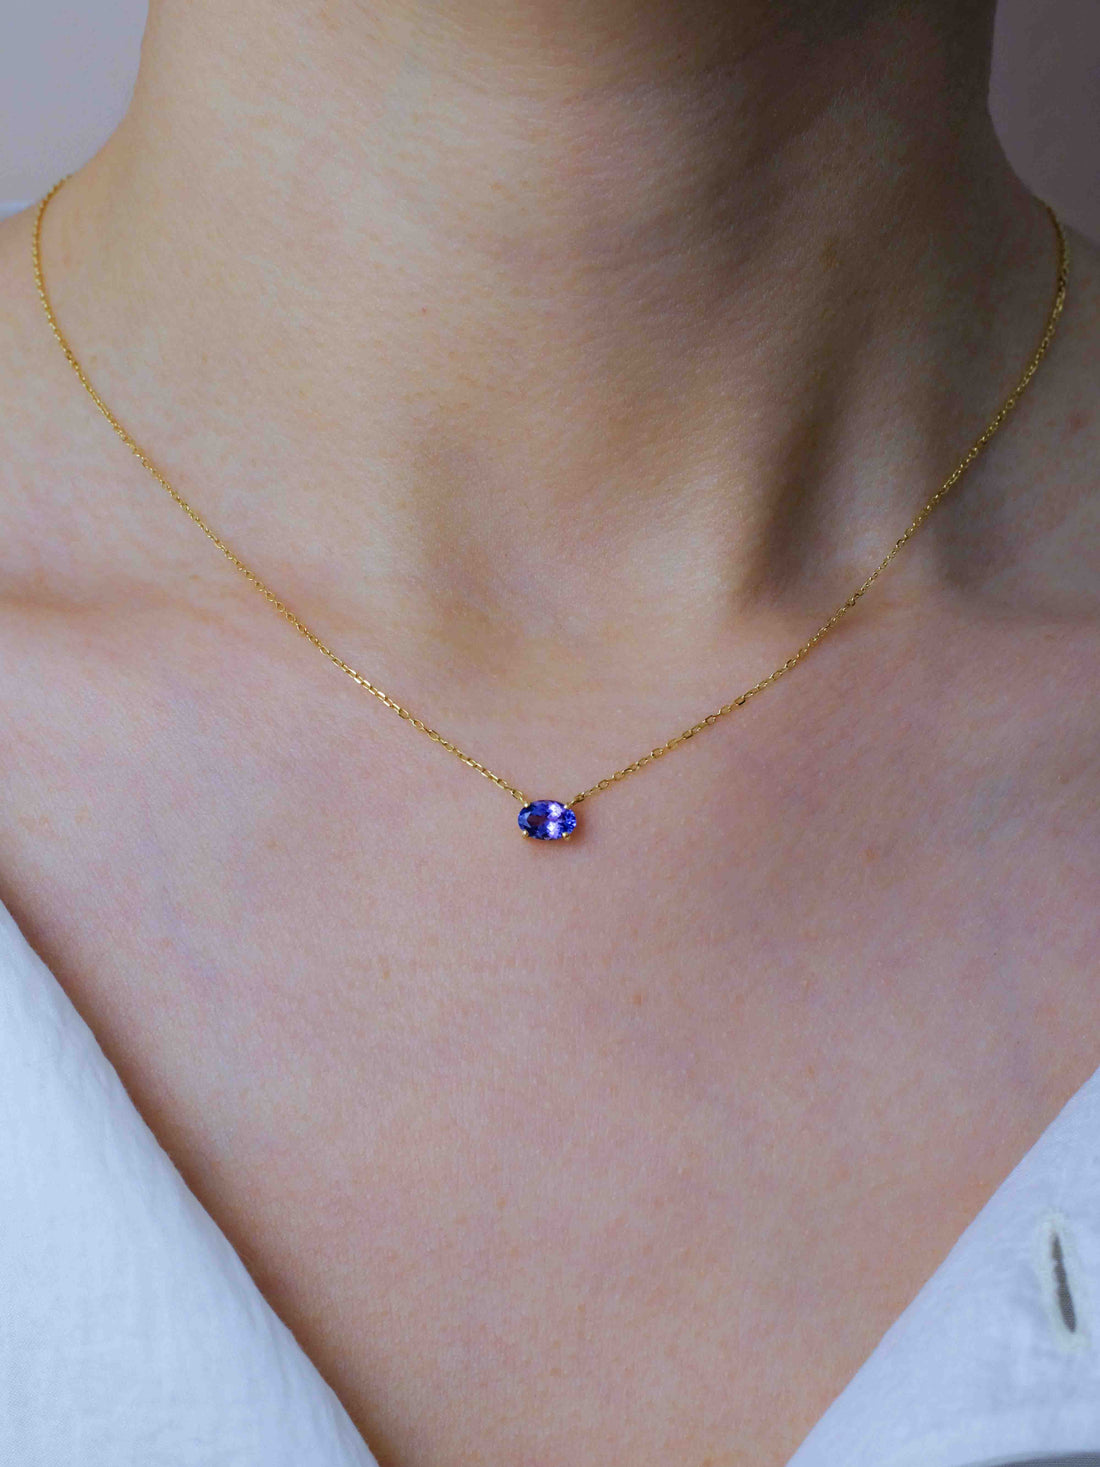 Baisc Oval Tanzanite Necklace, 18k solid gold